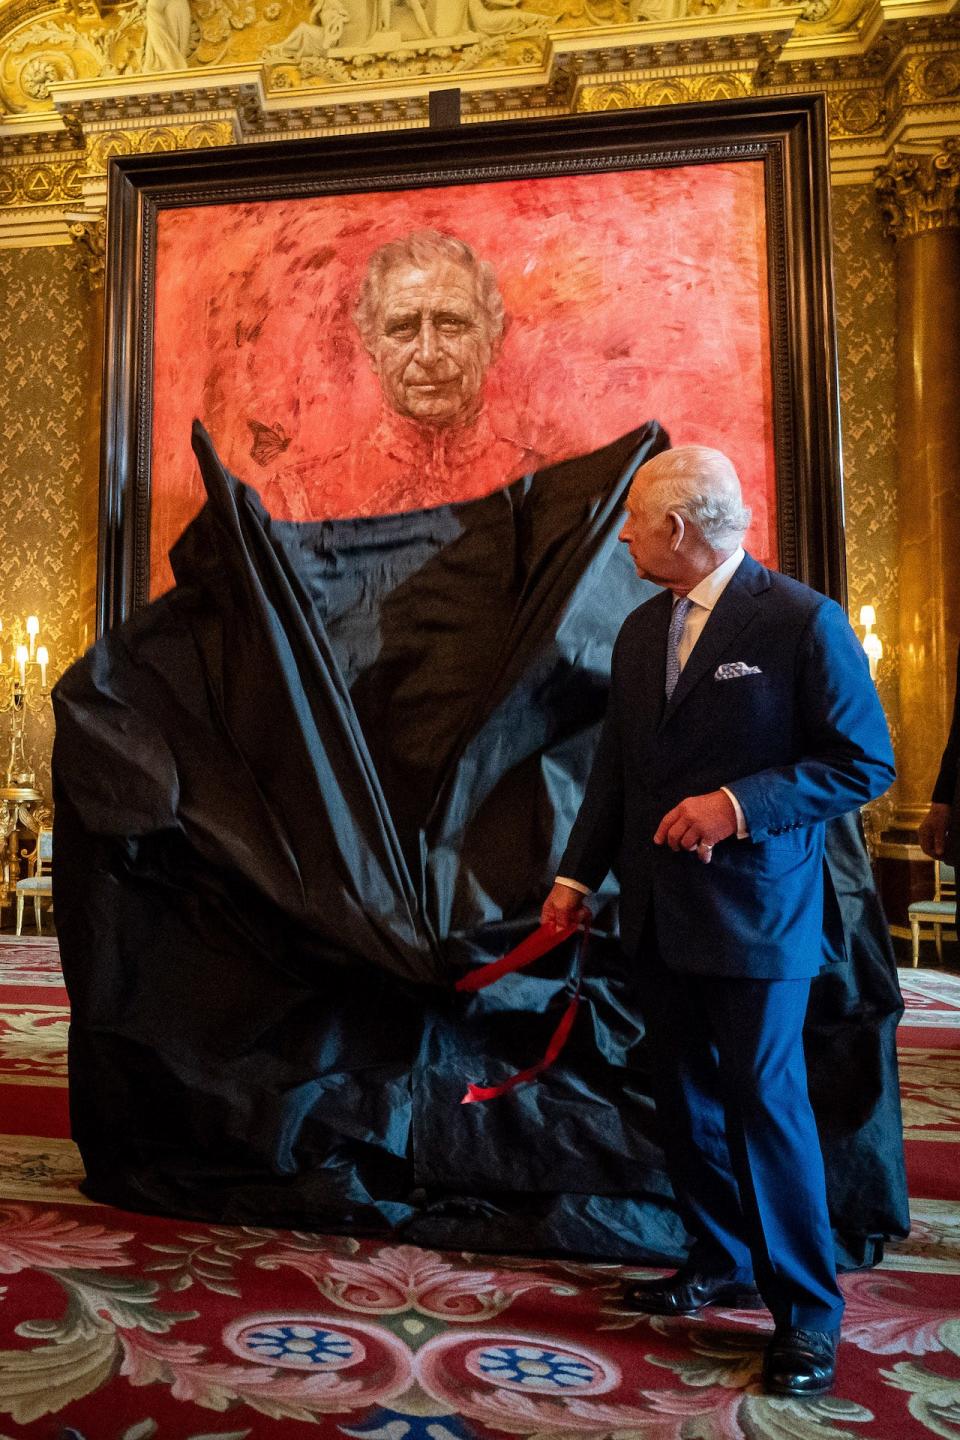 King Charles III at Buckingham Palace pulling down a black sheet to reveal his first portrait since his coronation.